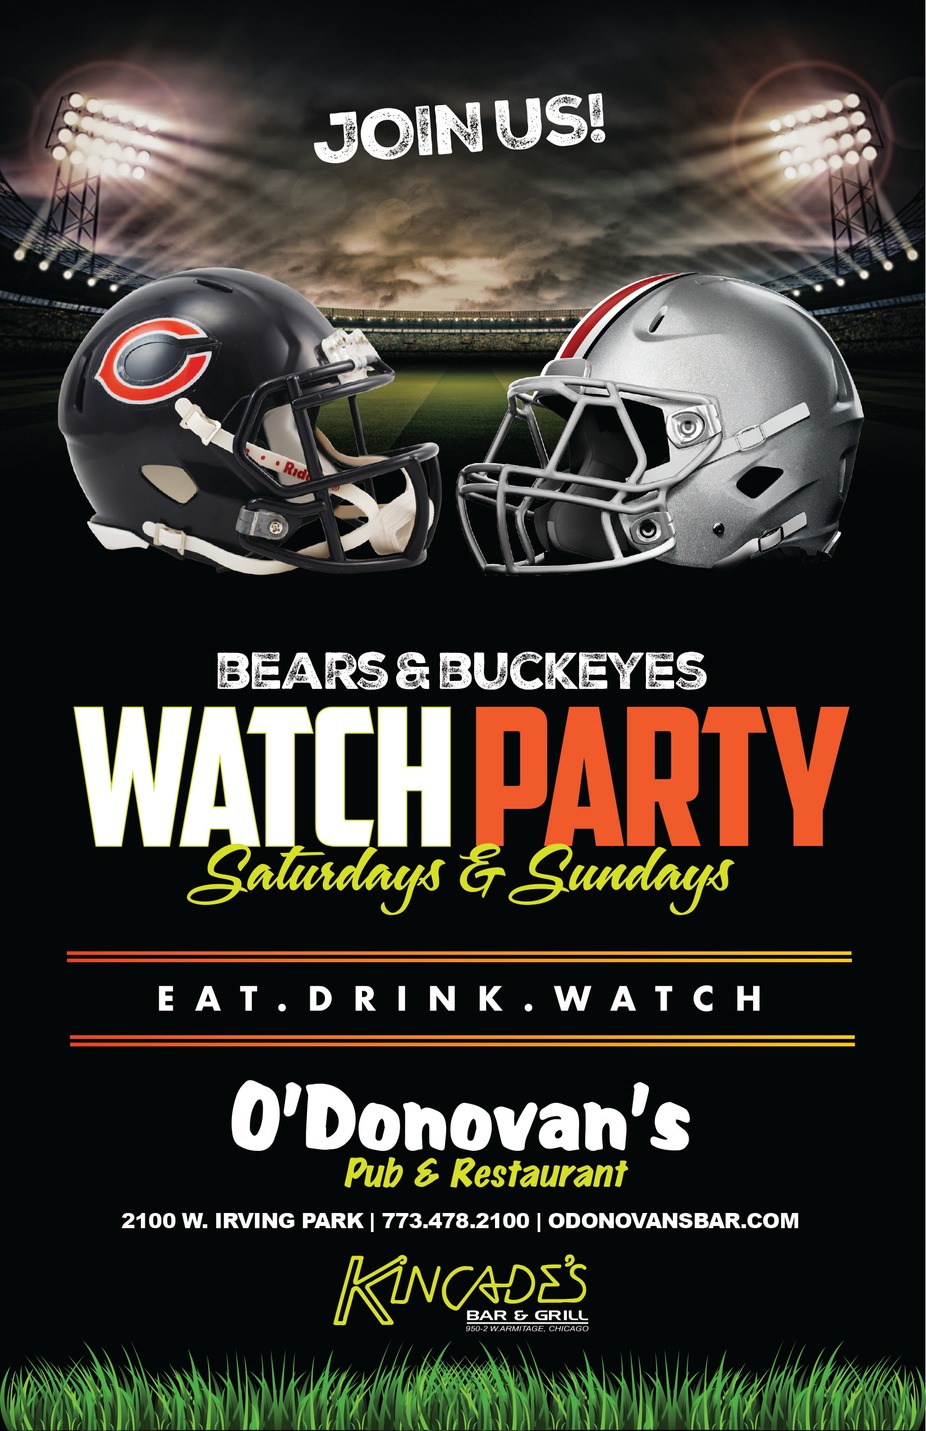 JOIN US FOR BEARS & BUCKEYES WATCH PARTY event photo